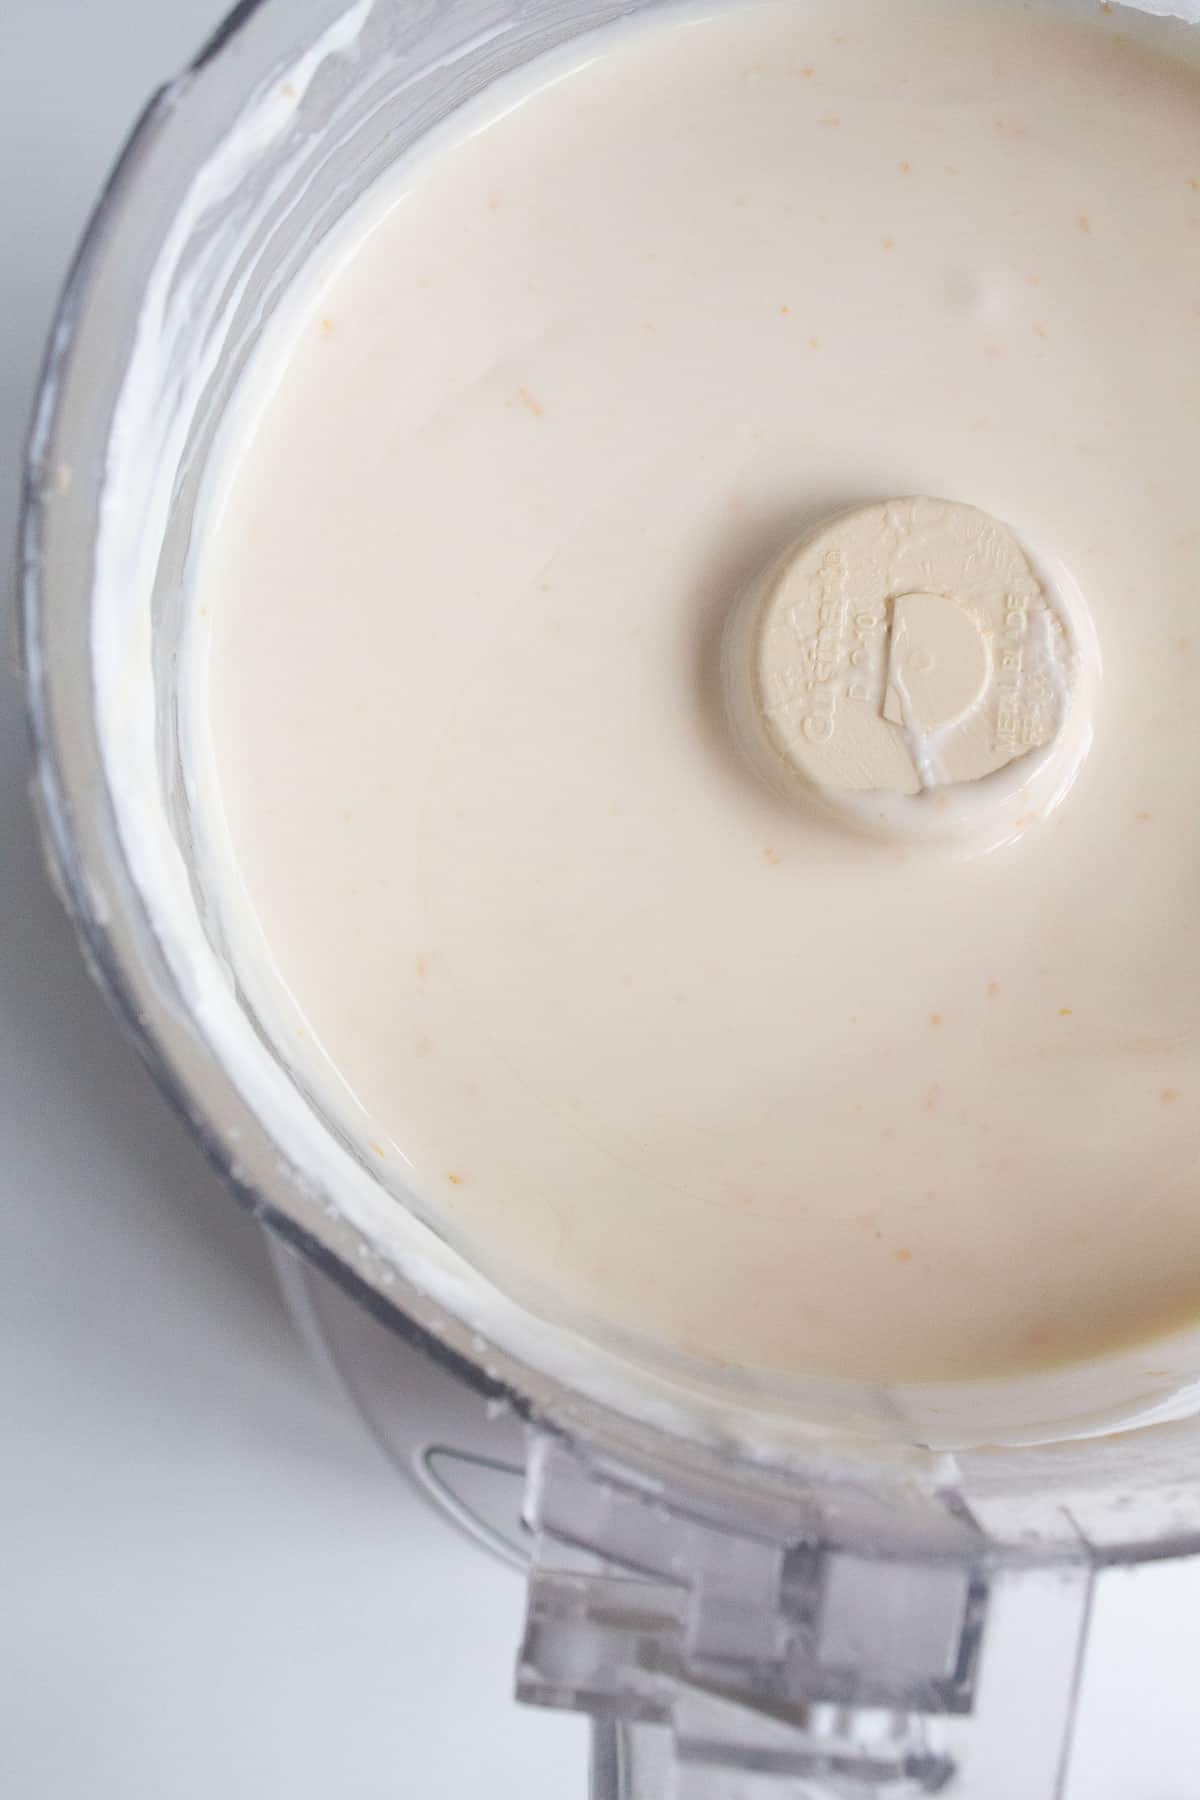 The cream cheese cheesecake filling mixed in a food processor.